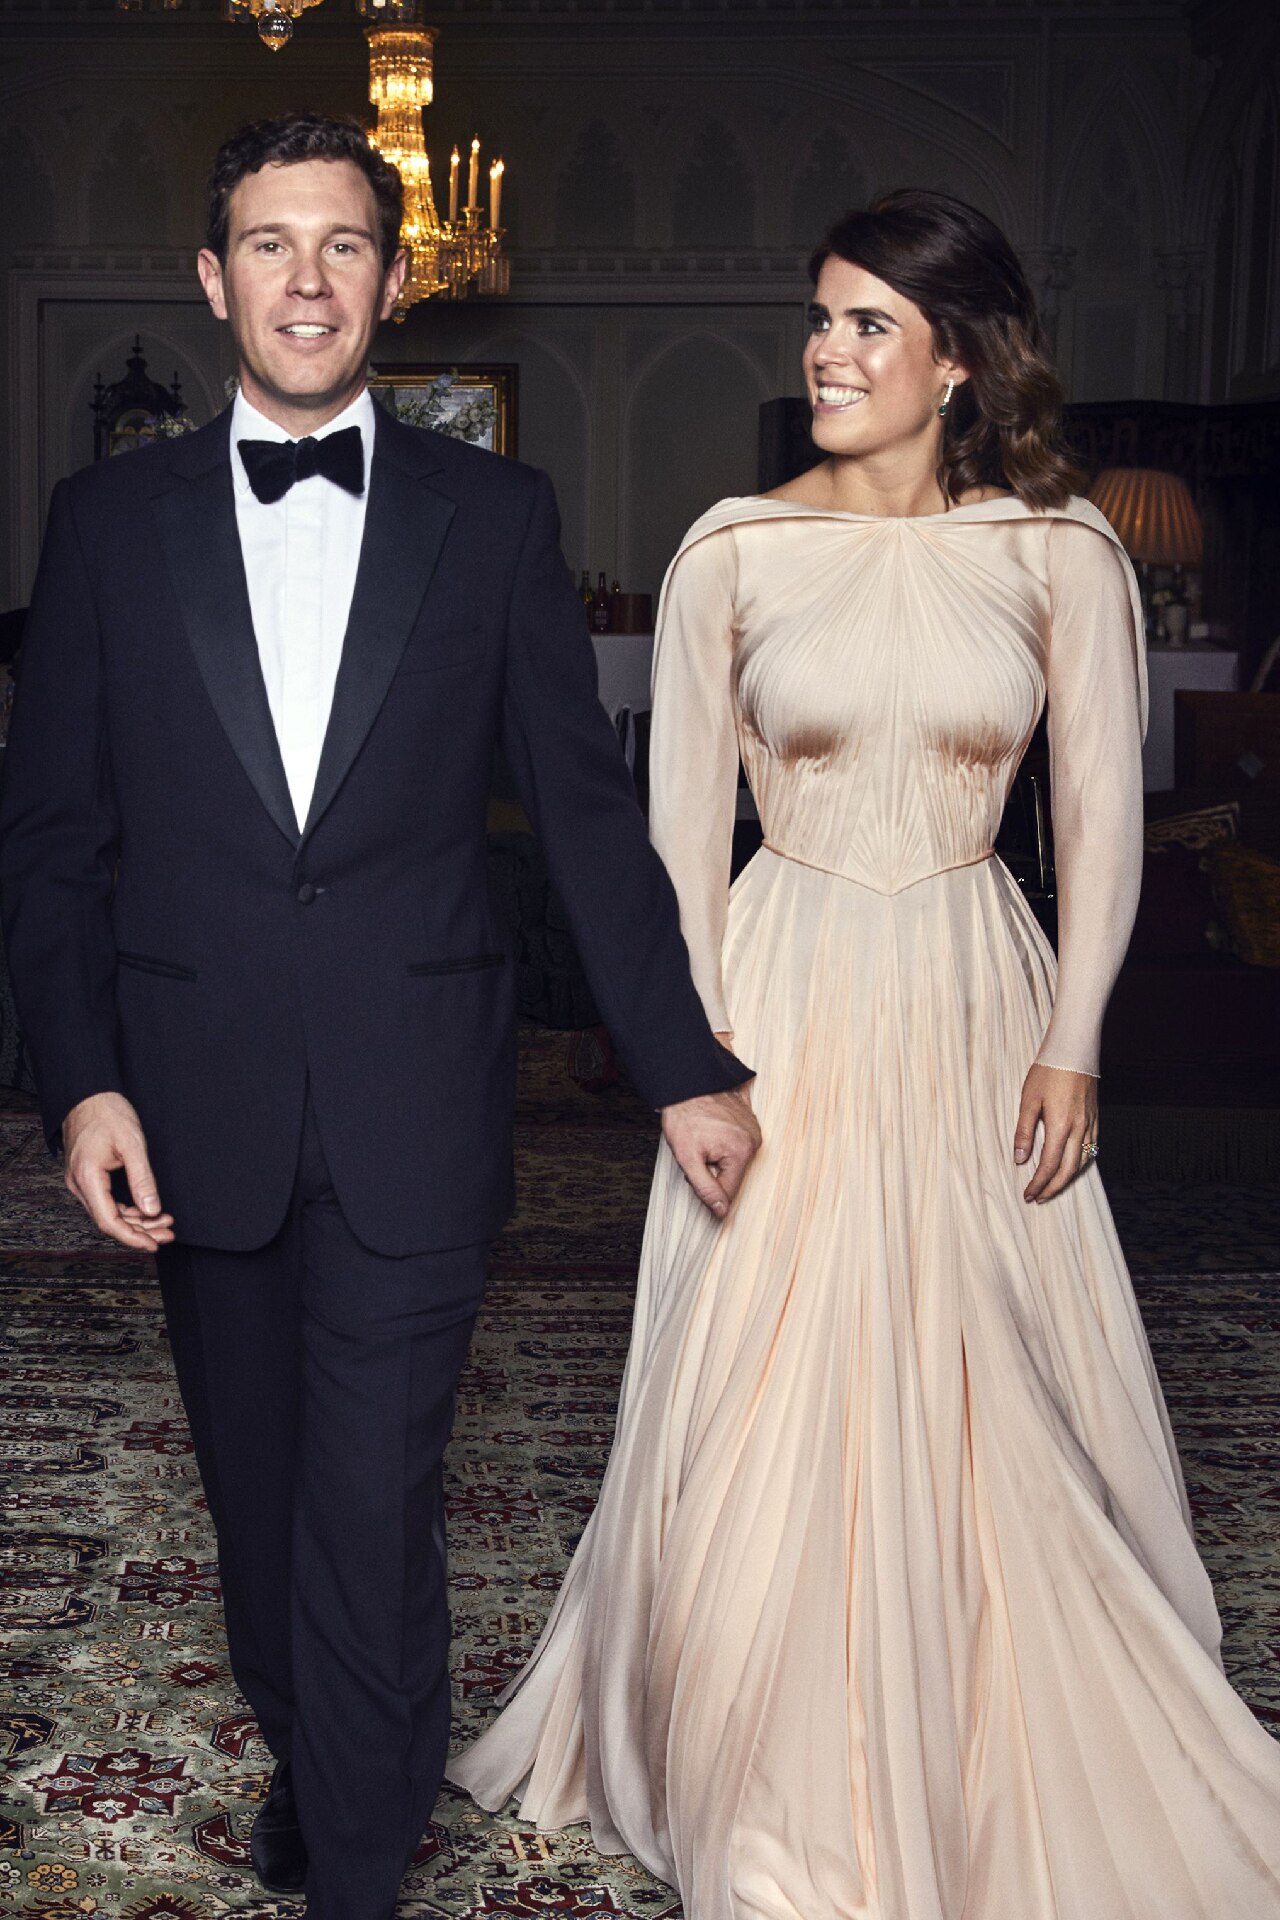 The Best Celebrity Wedding Reception Dresses Of All Time | The Advertiser